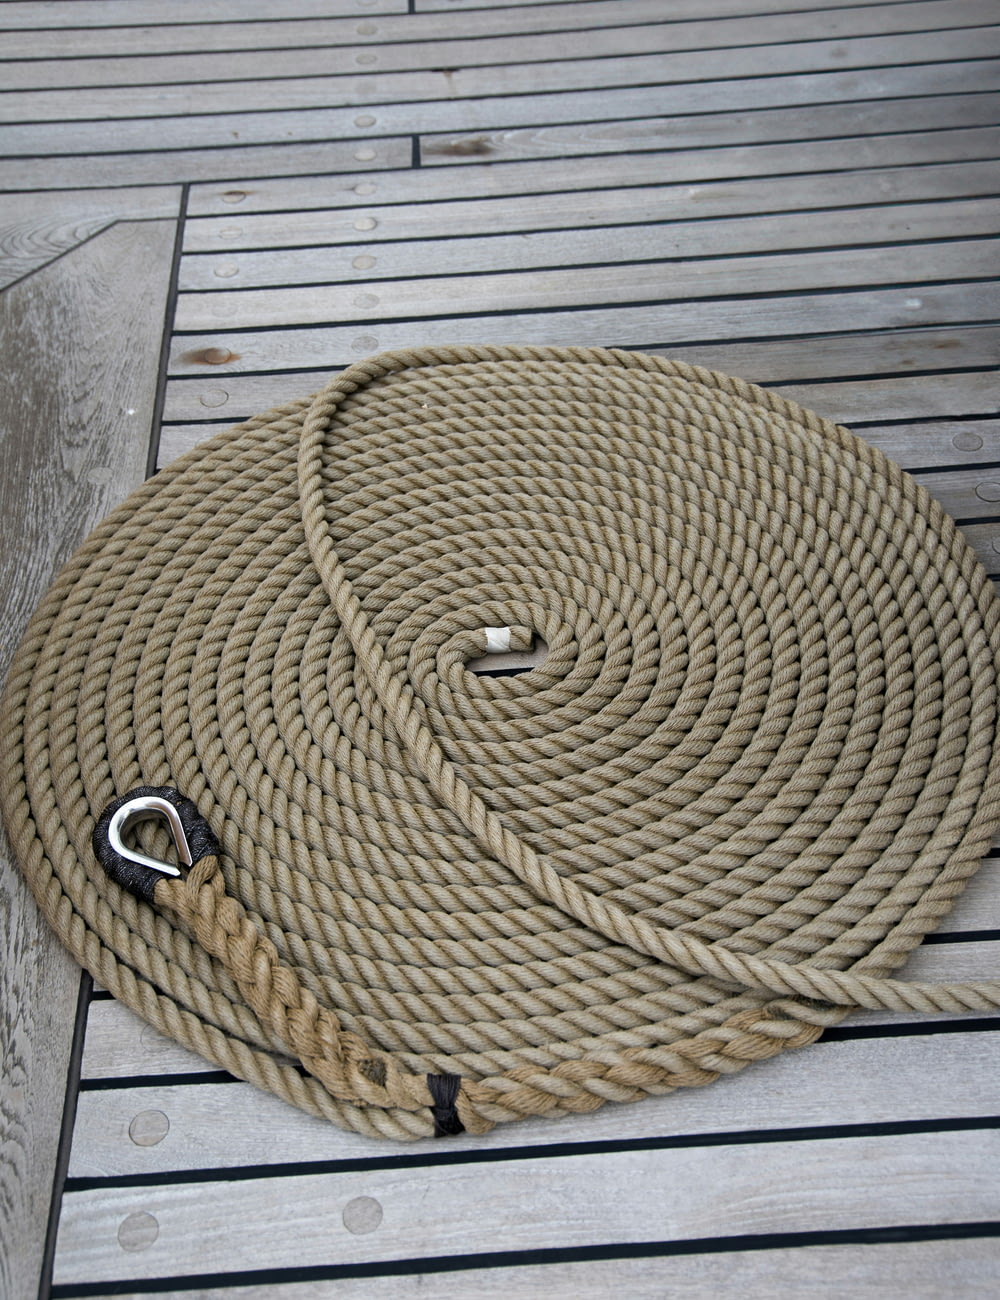 a close up of a rope on a wooden floor